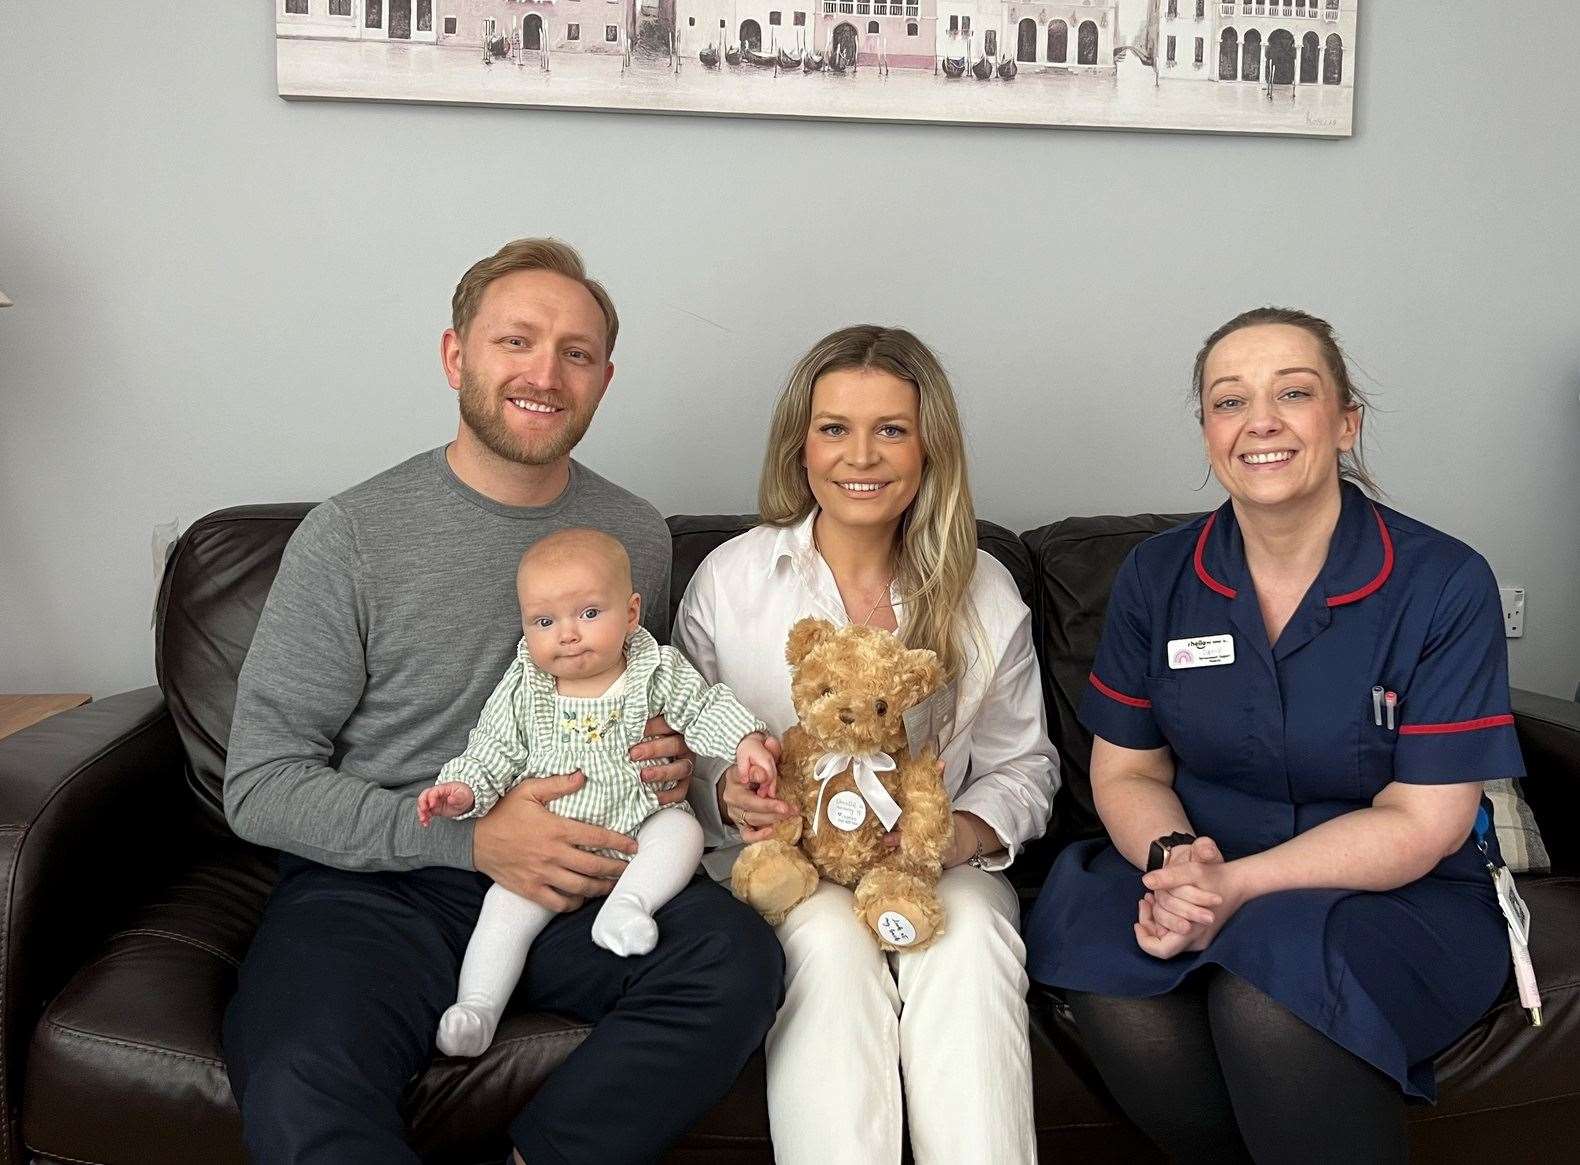 Jim and Pheobe made a special donation to help other parents experiencing child loss. They are pictured with their daughter, Primrose, and bereavement support midwife, Danielle Burnett